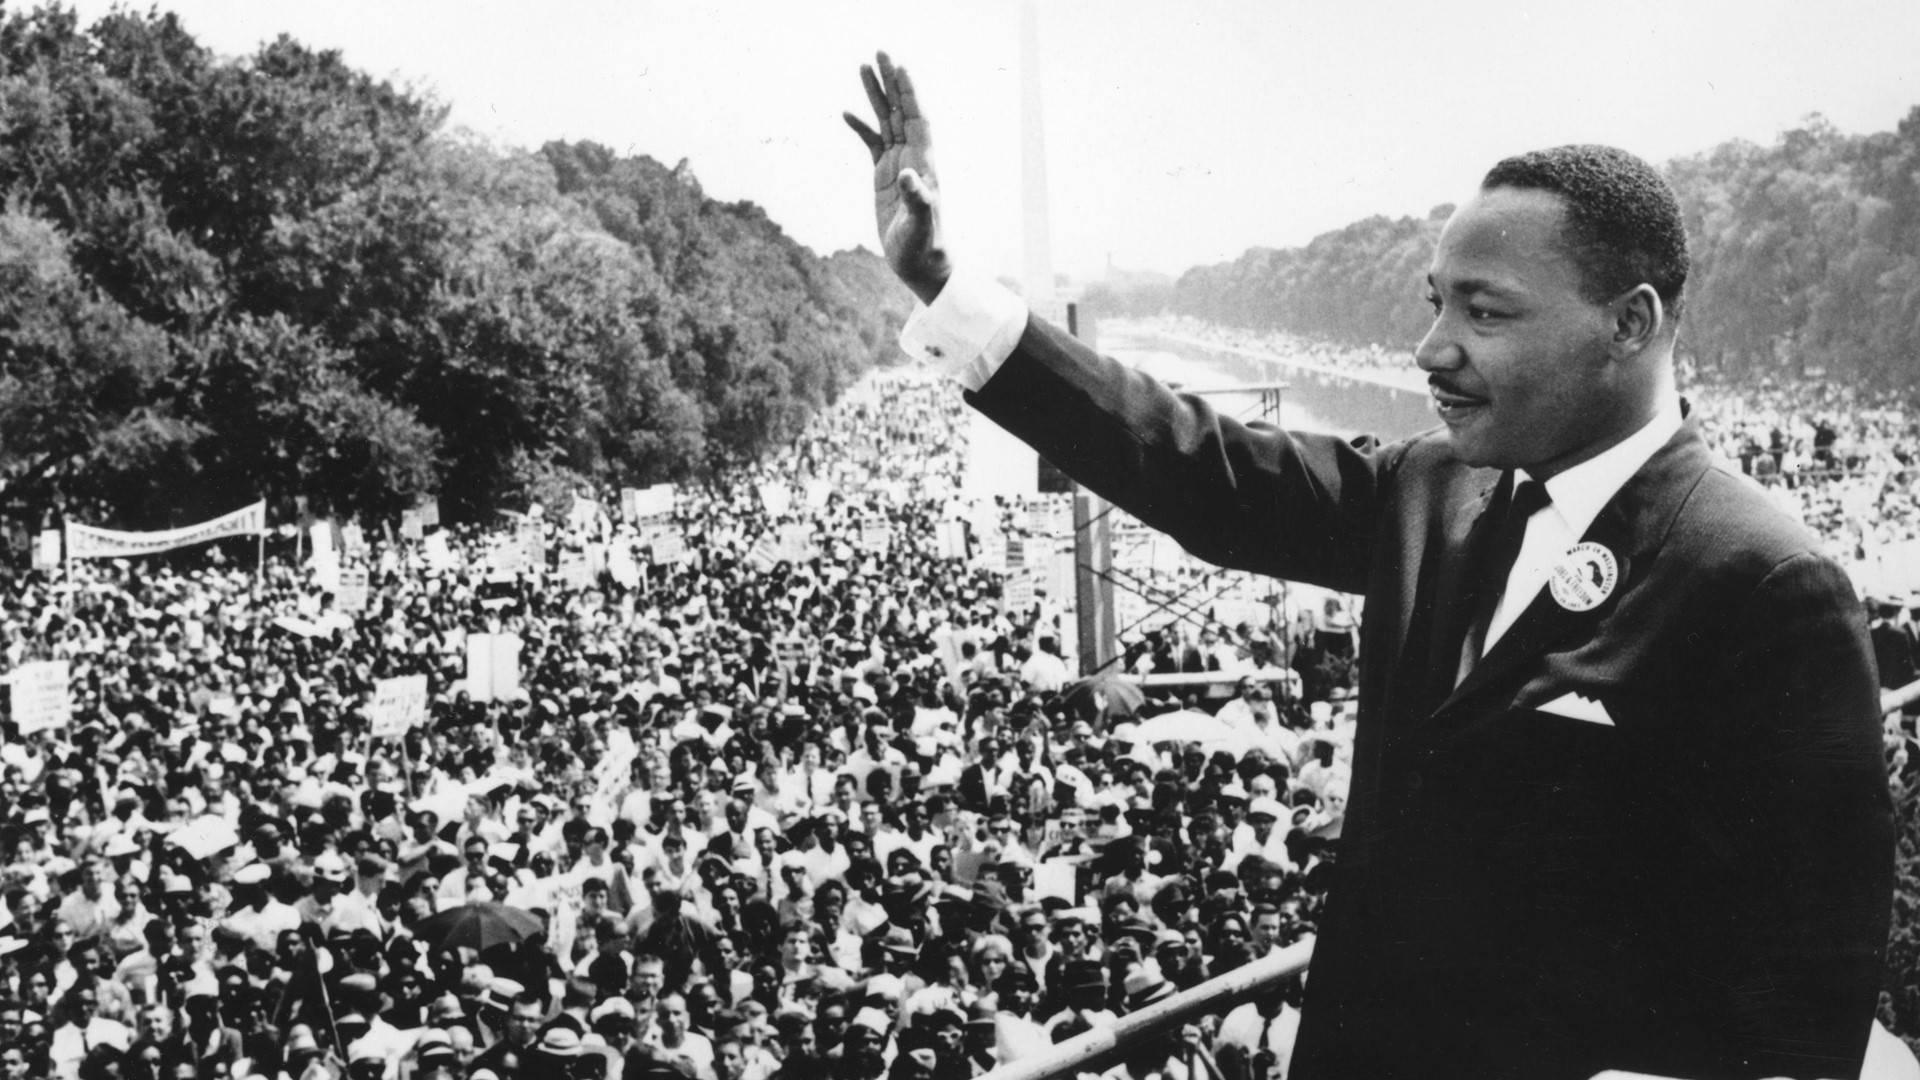 Martin Luther King Jr Waving To Crowd Wallpaper